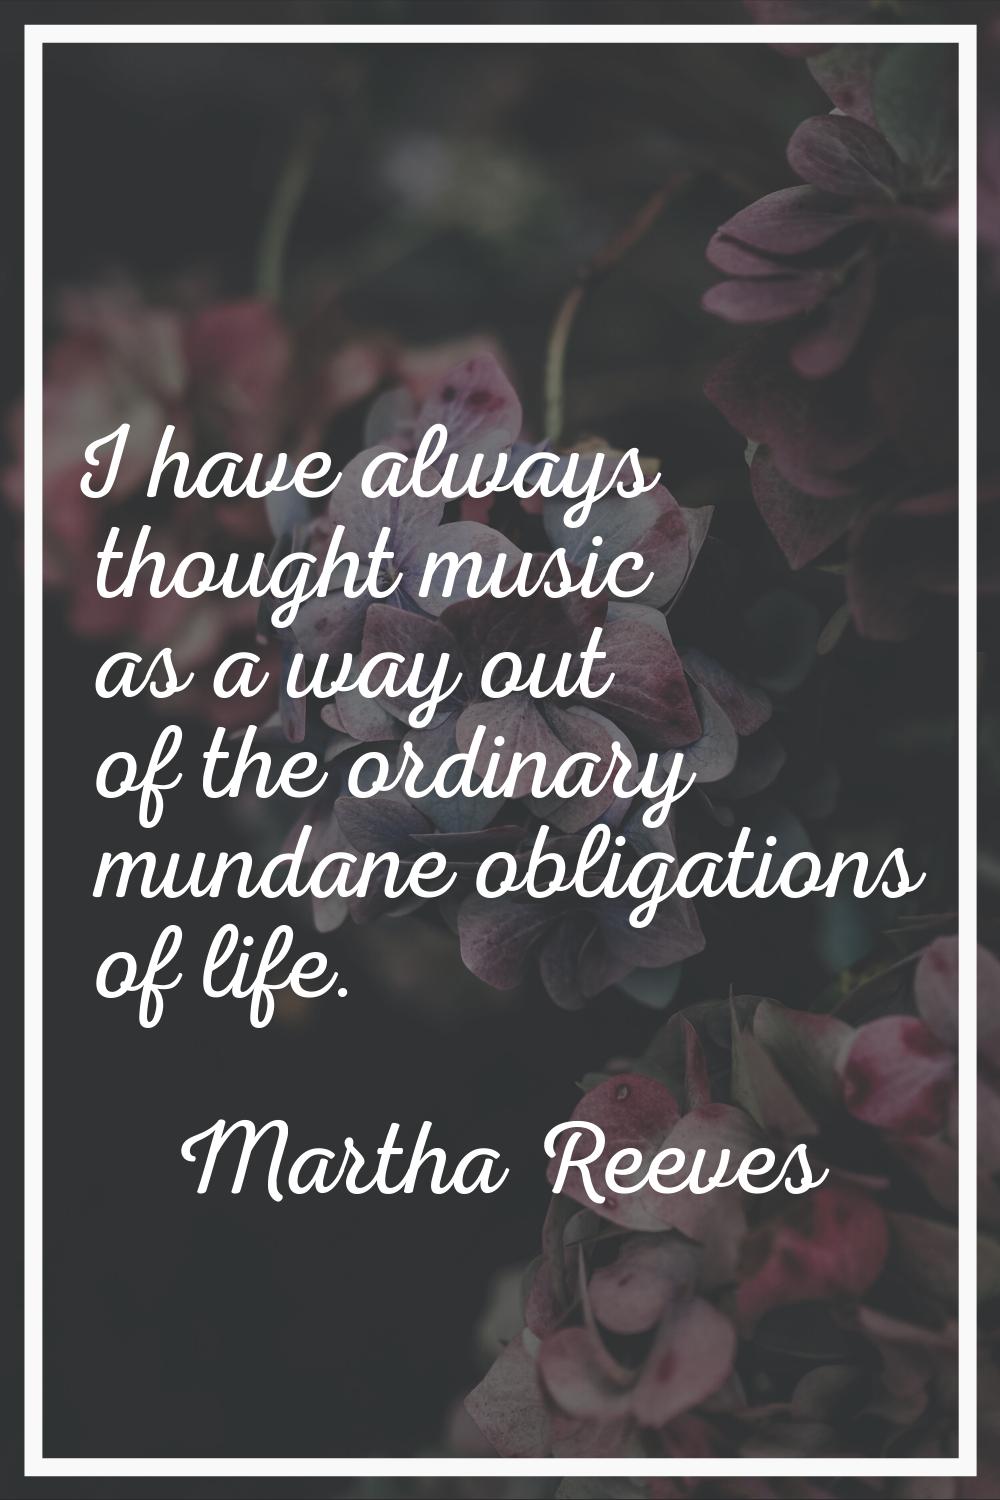 I have always thought music as a way out of the ordinary mundane obligations of life.